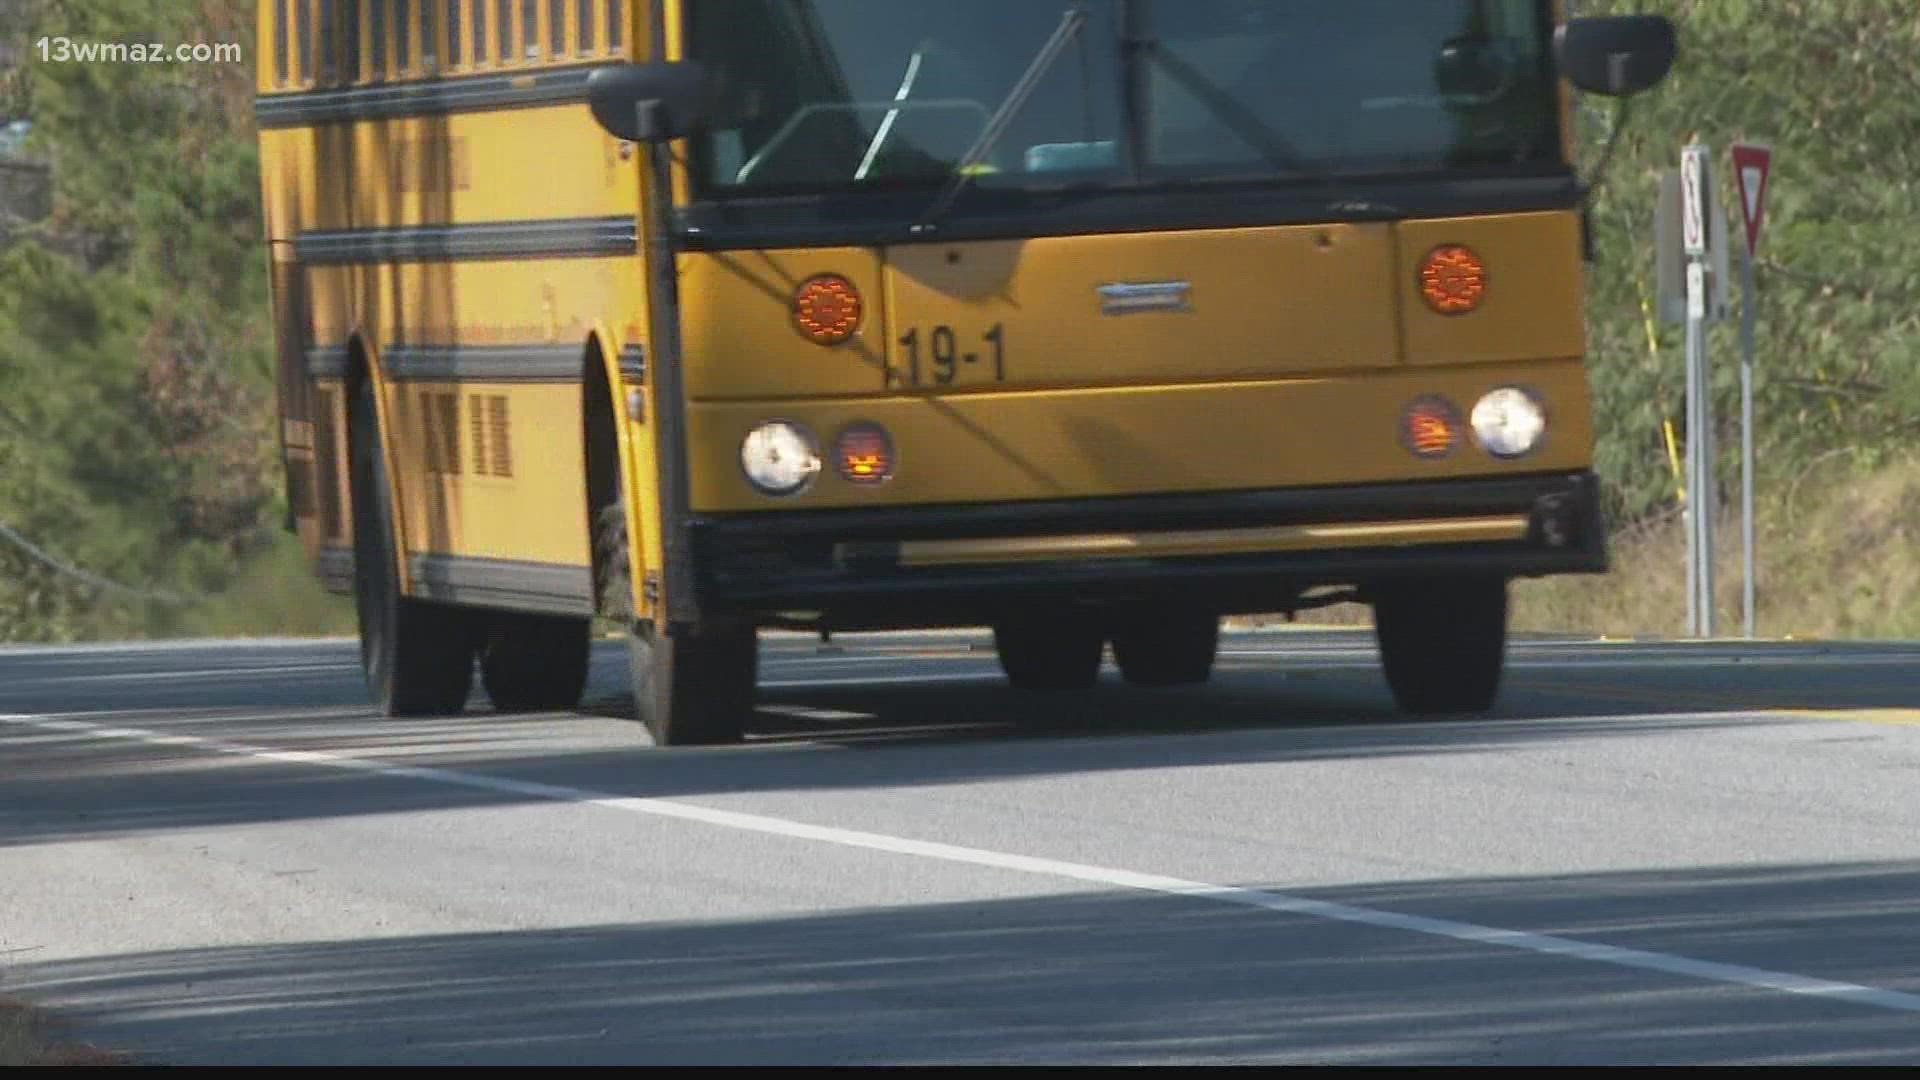 If you speed in a Milledgeville school zone, somebody will be watching. City police launched speed cameras to monitor speeds in front of Baldwin High School